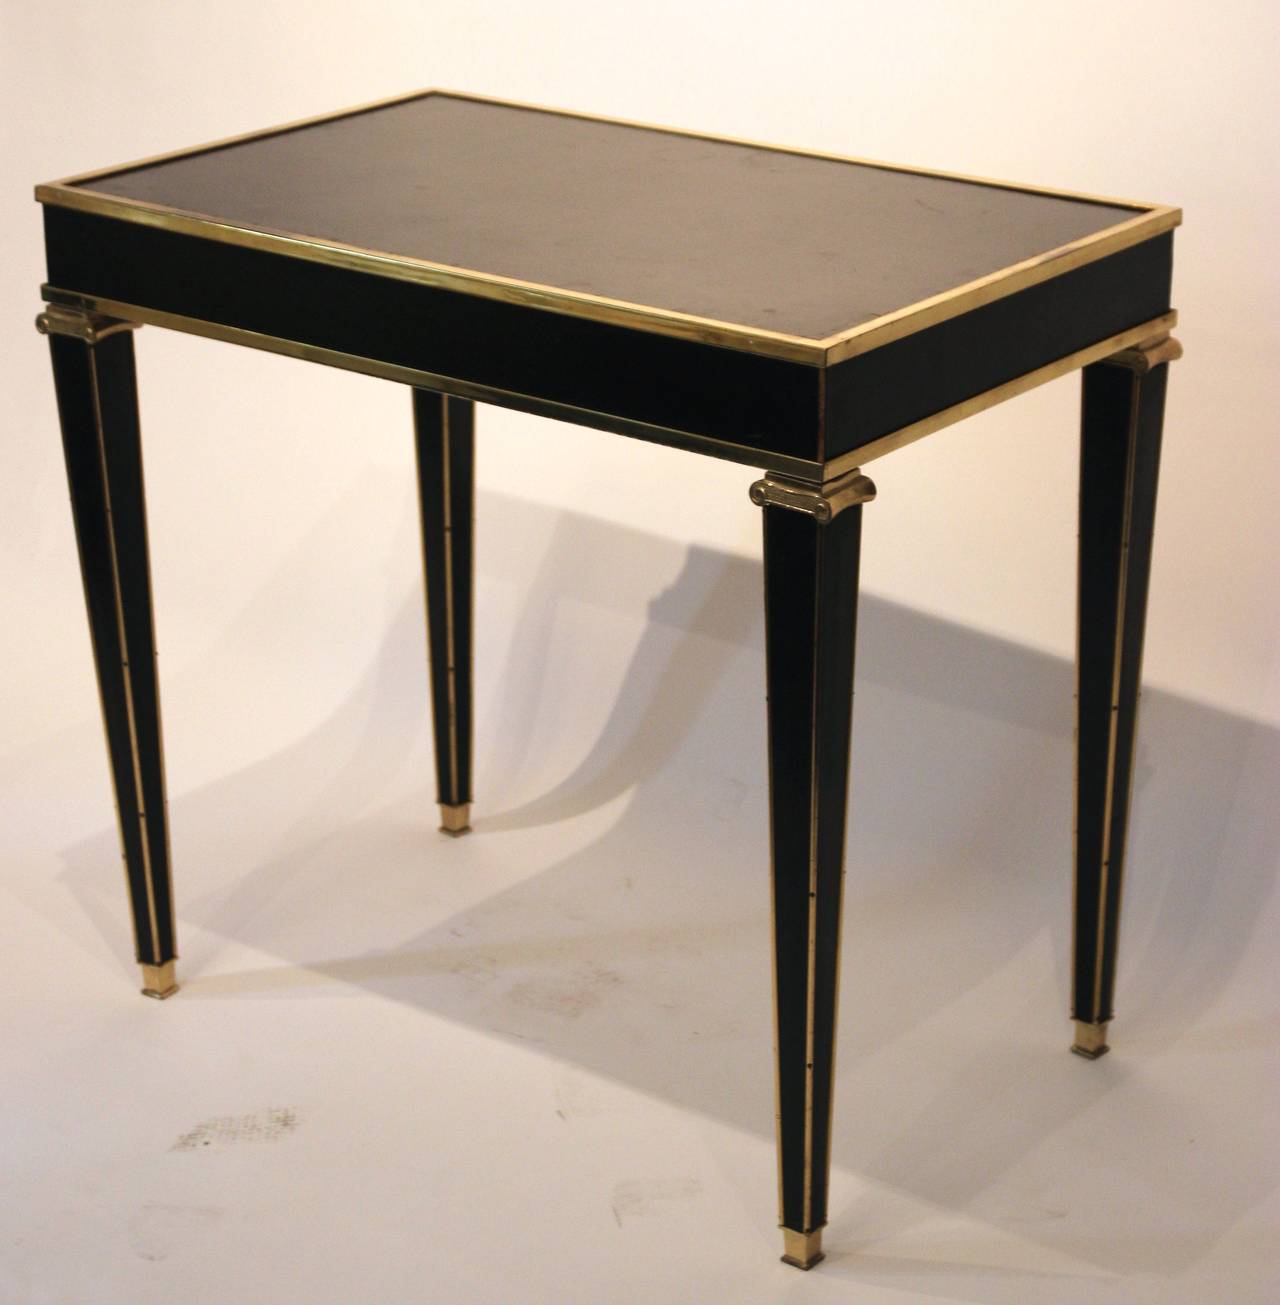 Centerpiece by Marc Duplantier,
wood core wrapped in black leather,
hooves capitals gilded bronze and varnishes,
threads and golden brass corners and varnishes,
France, circa 1940.
Vintage condition.
Measures: Height 76 cm, length 81 cm, width